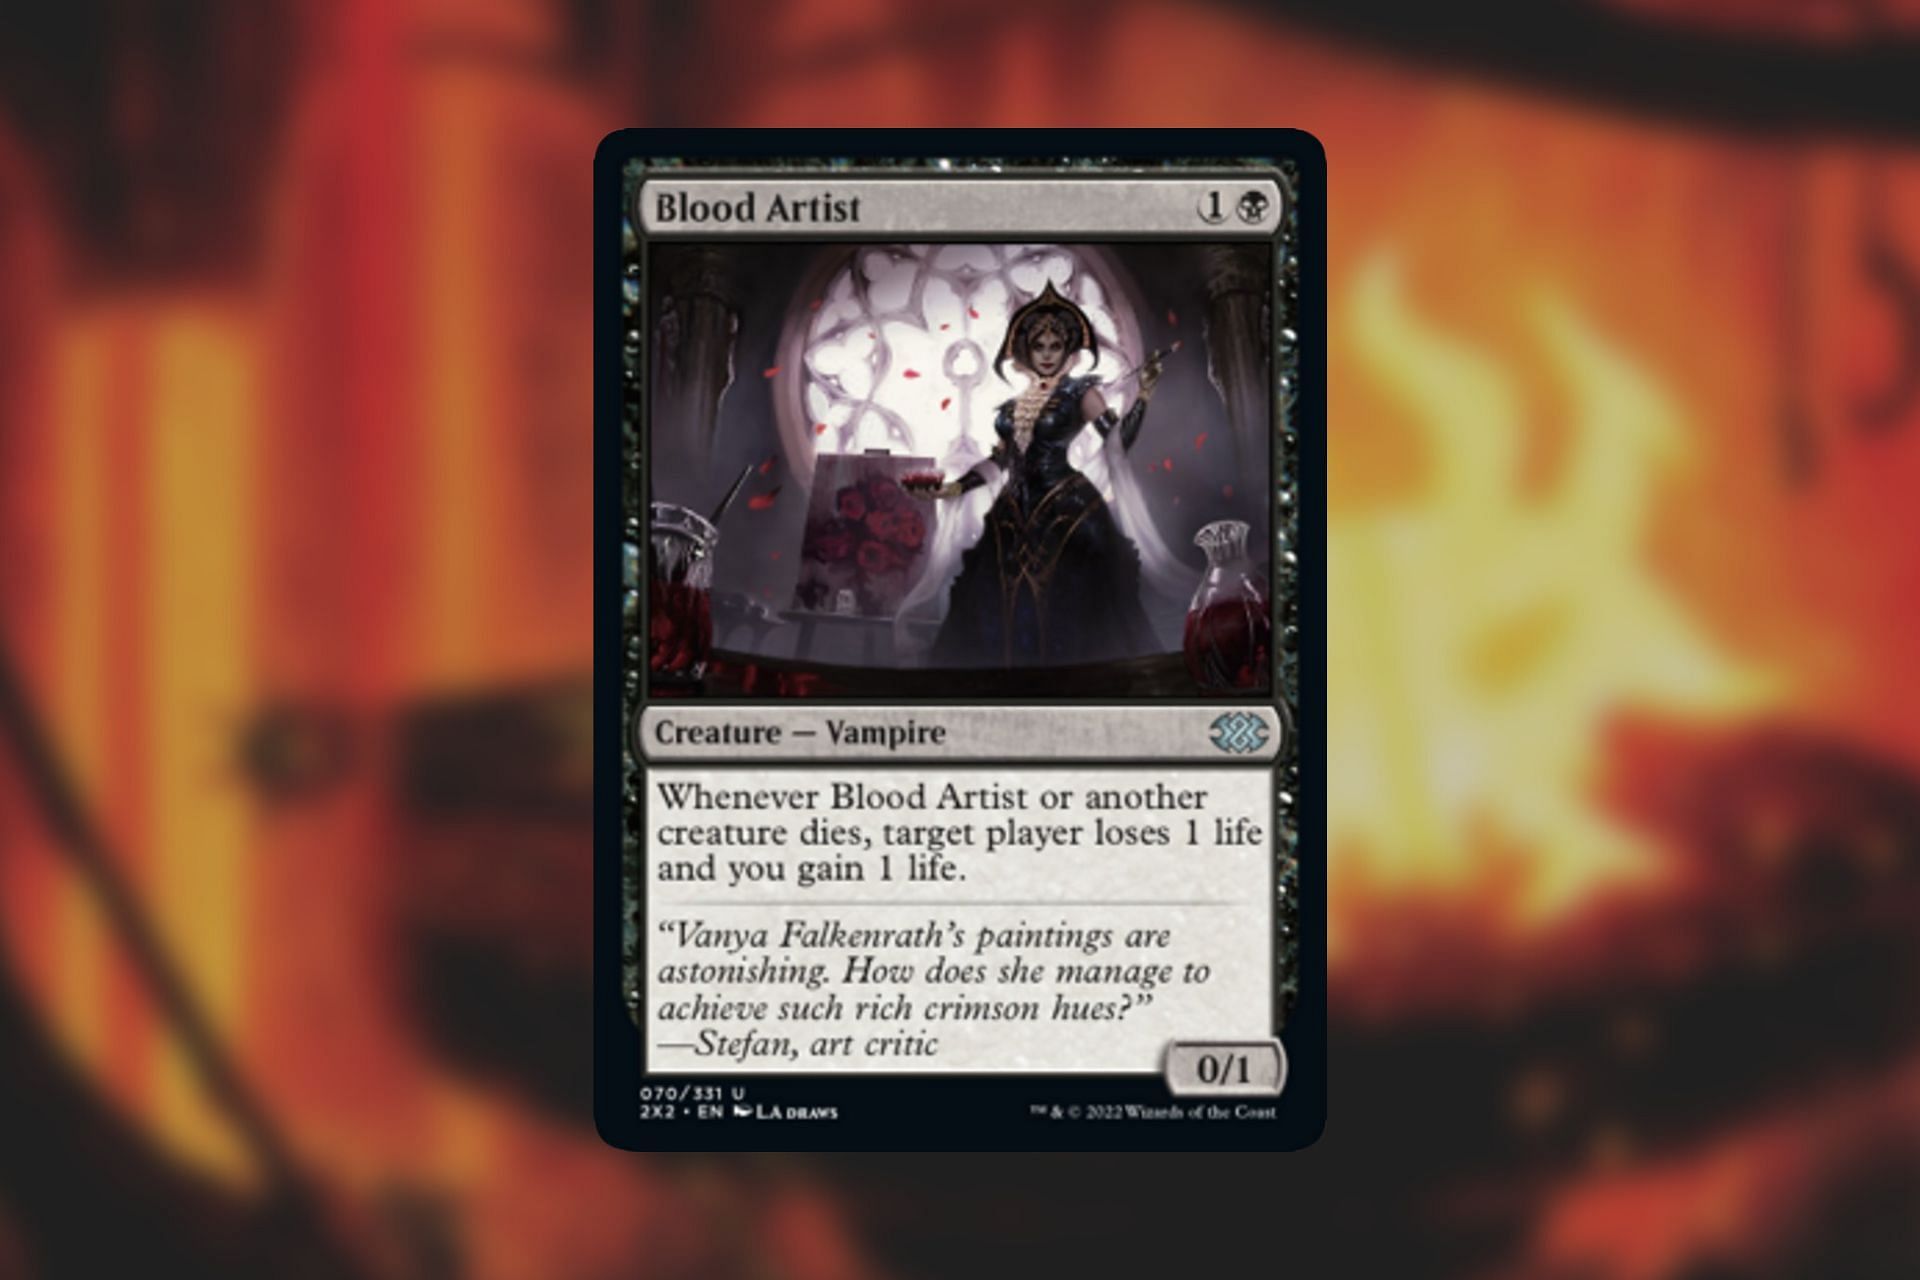 The Blood Artist in Magic: The Gathering (Image via Wizards of the Coast)